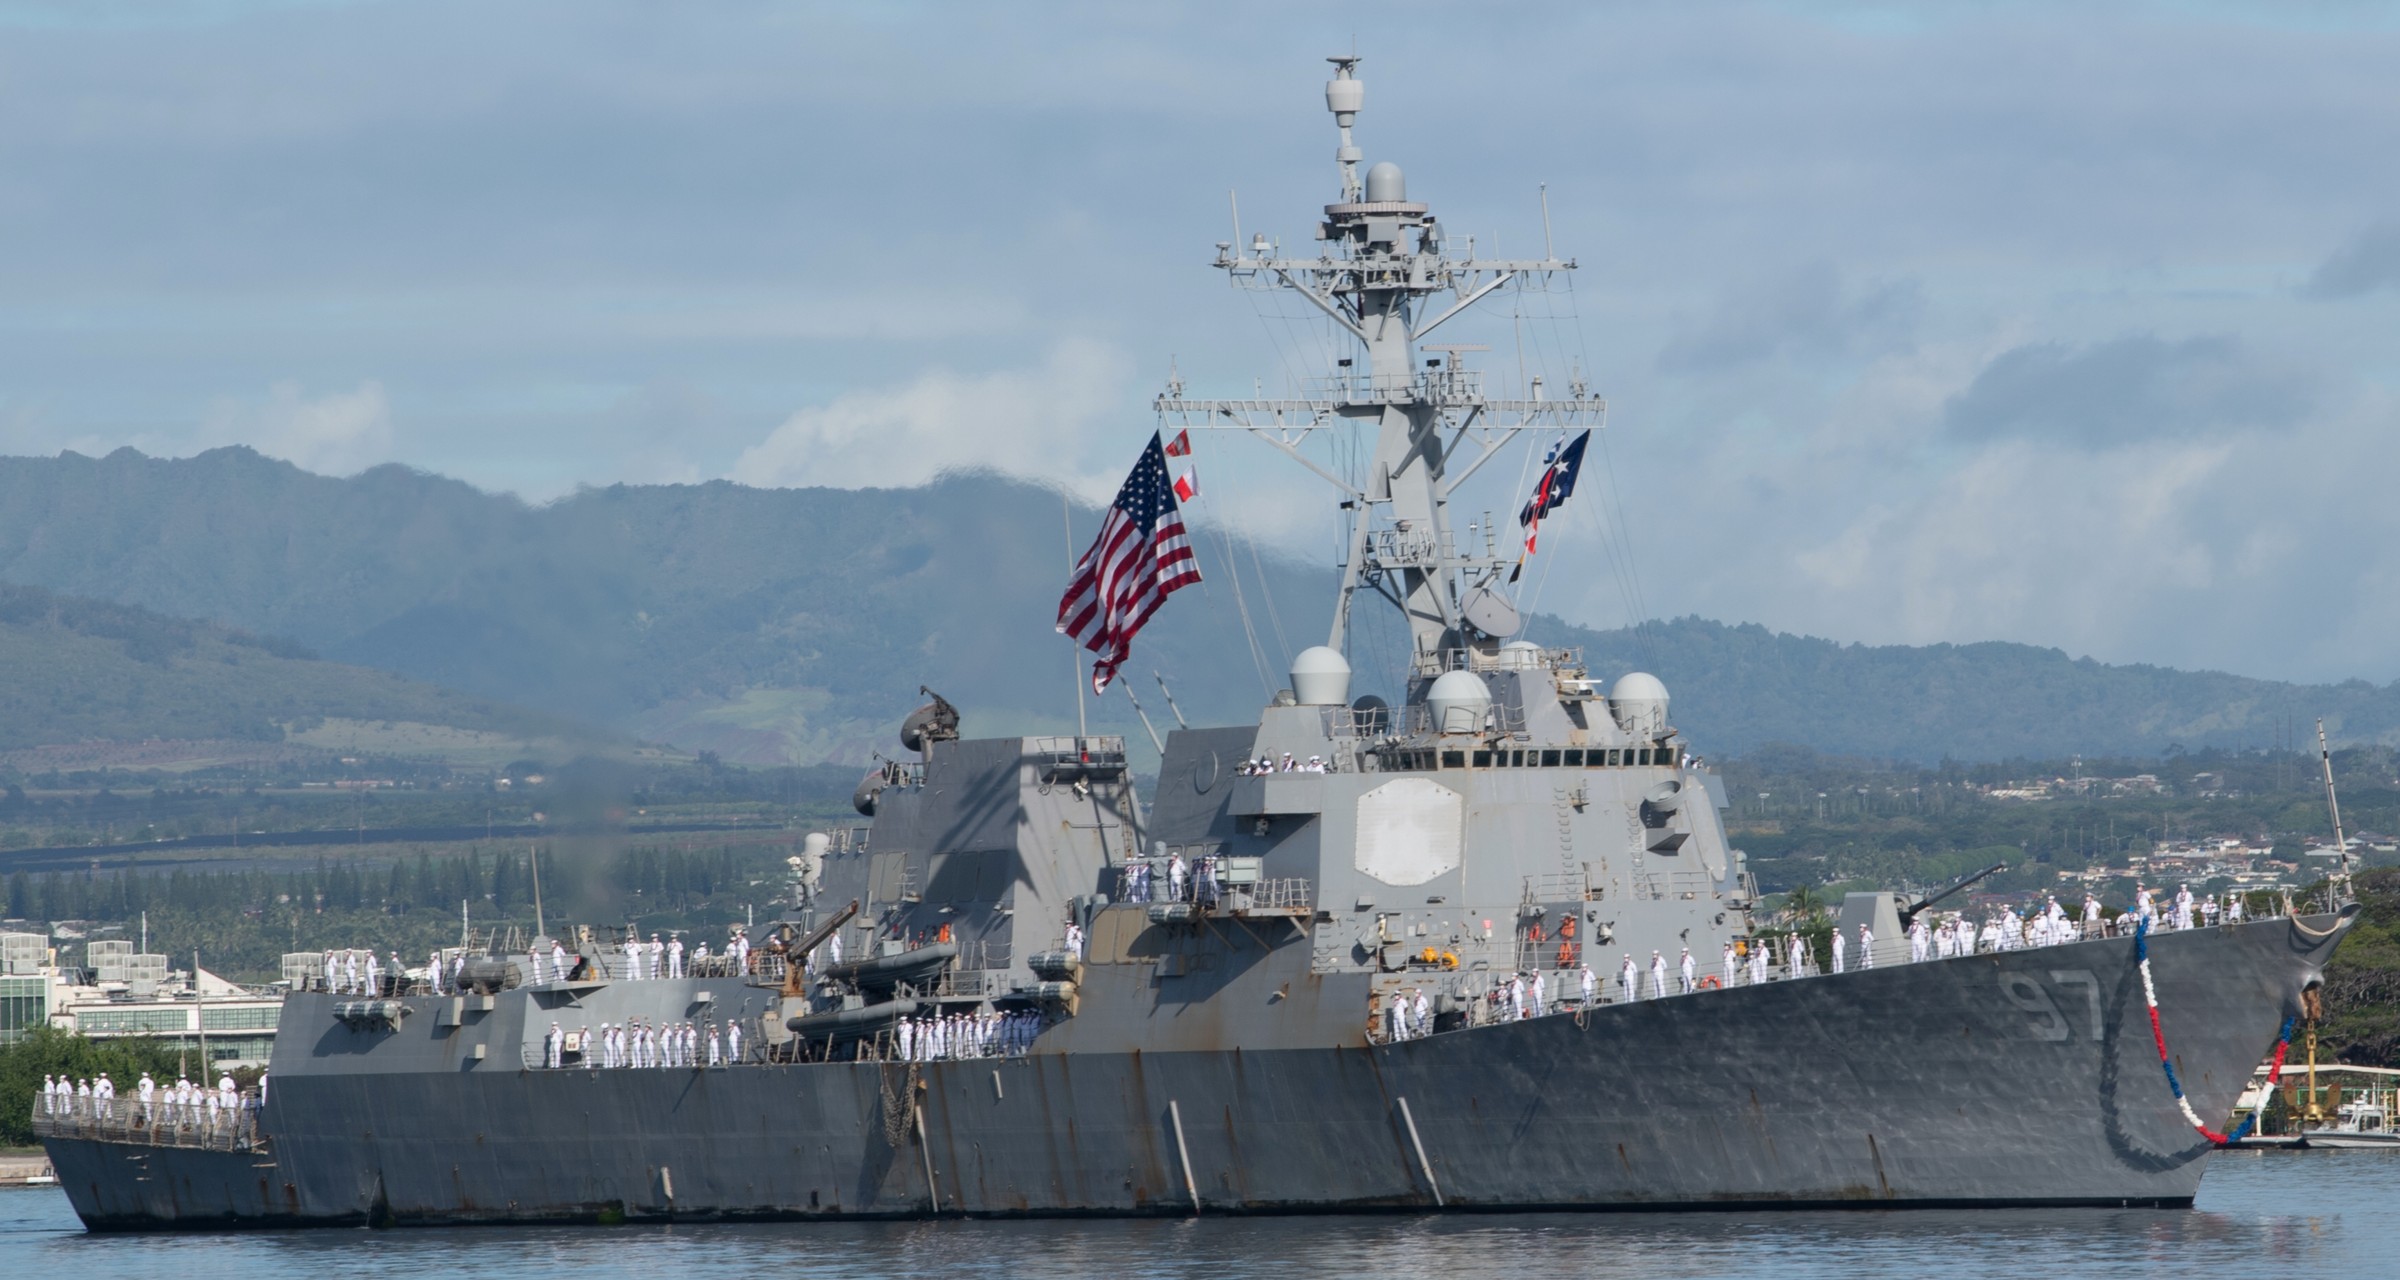 ddg-97 uss halsey arleigh burke class guided missile destroyer aegis joint base pearl harbor hickam hawaii 73